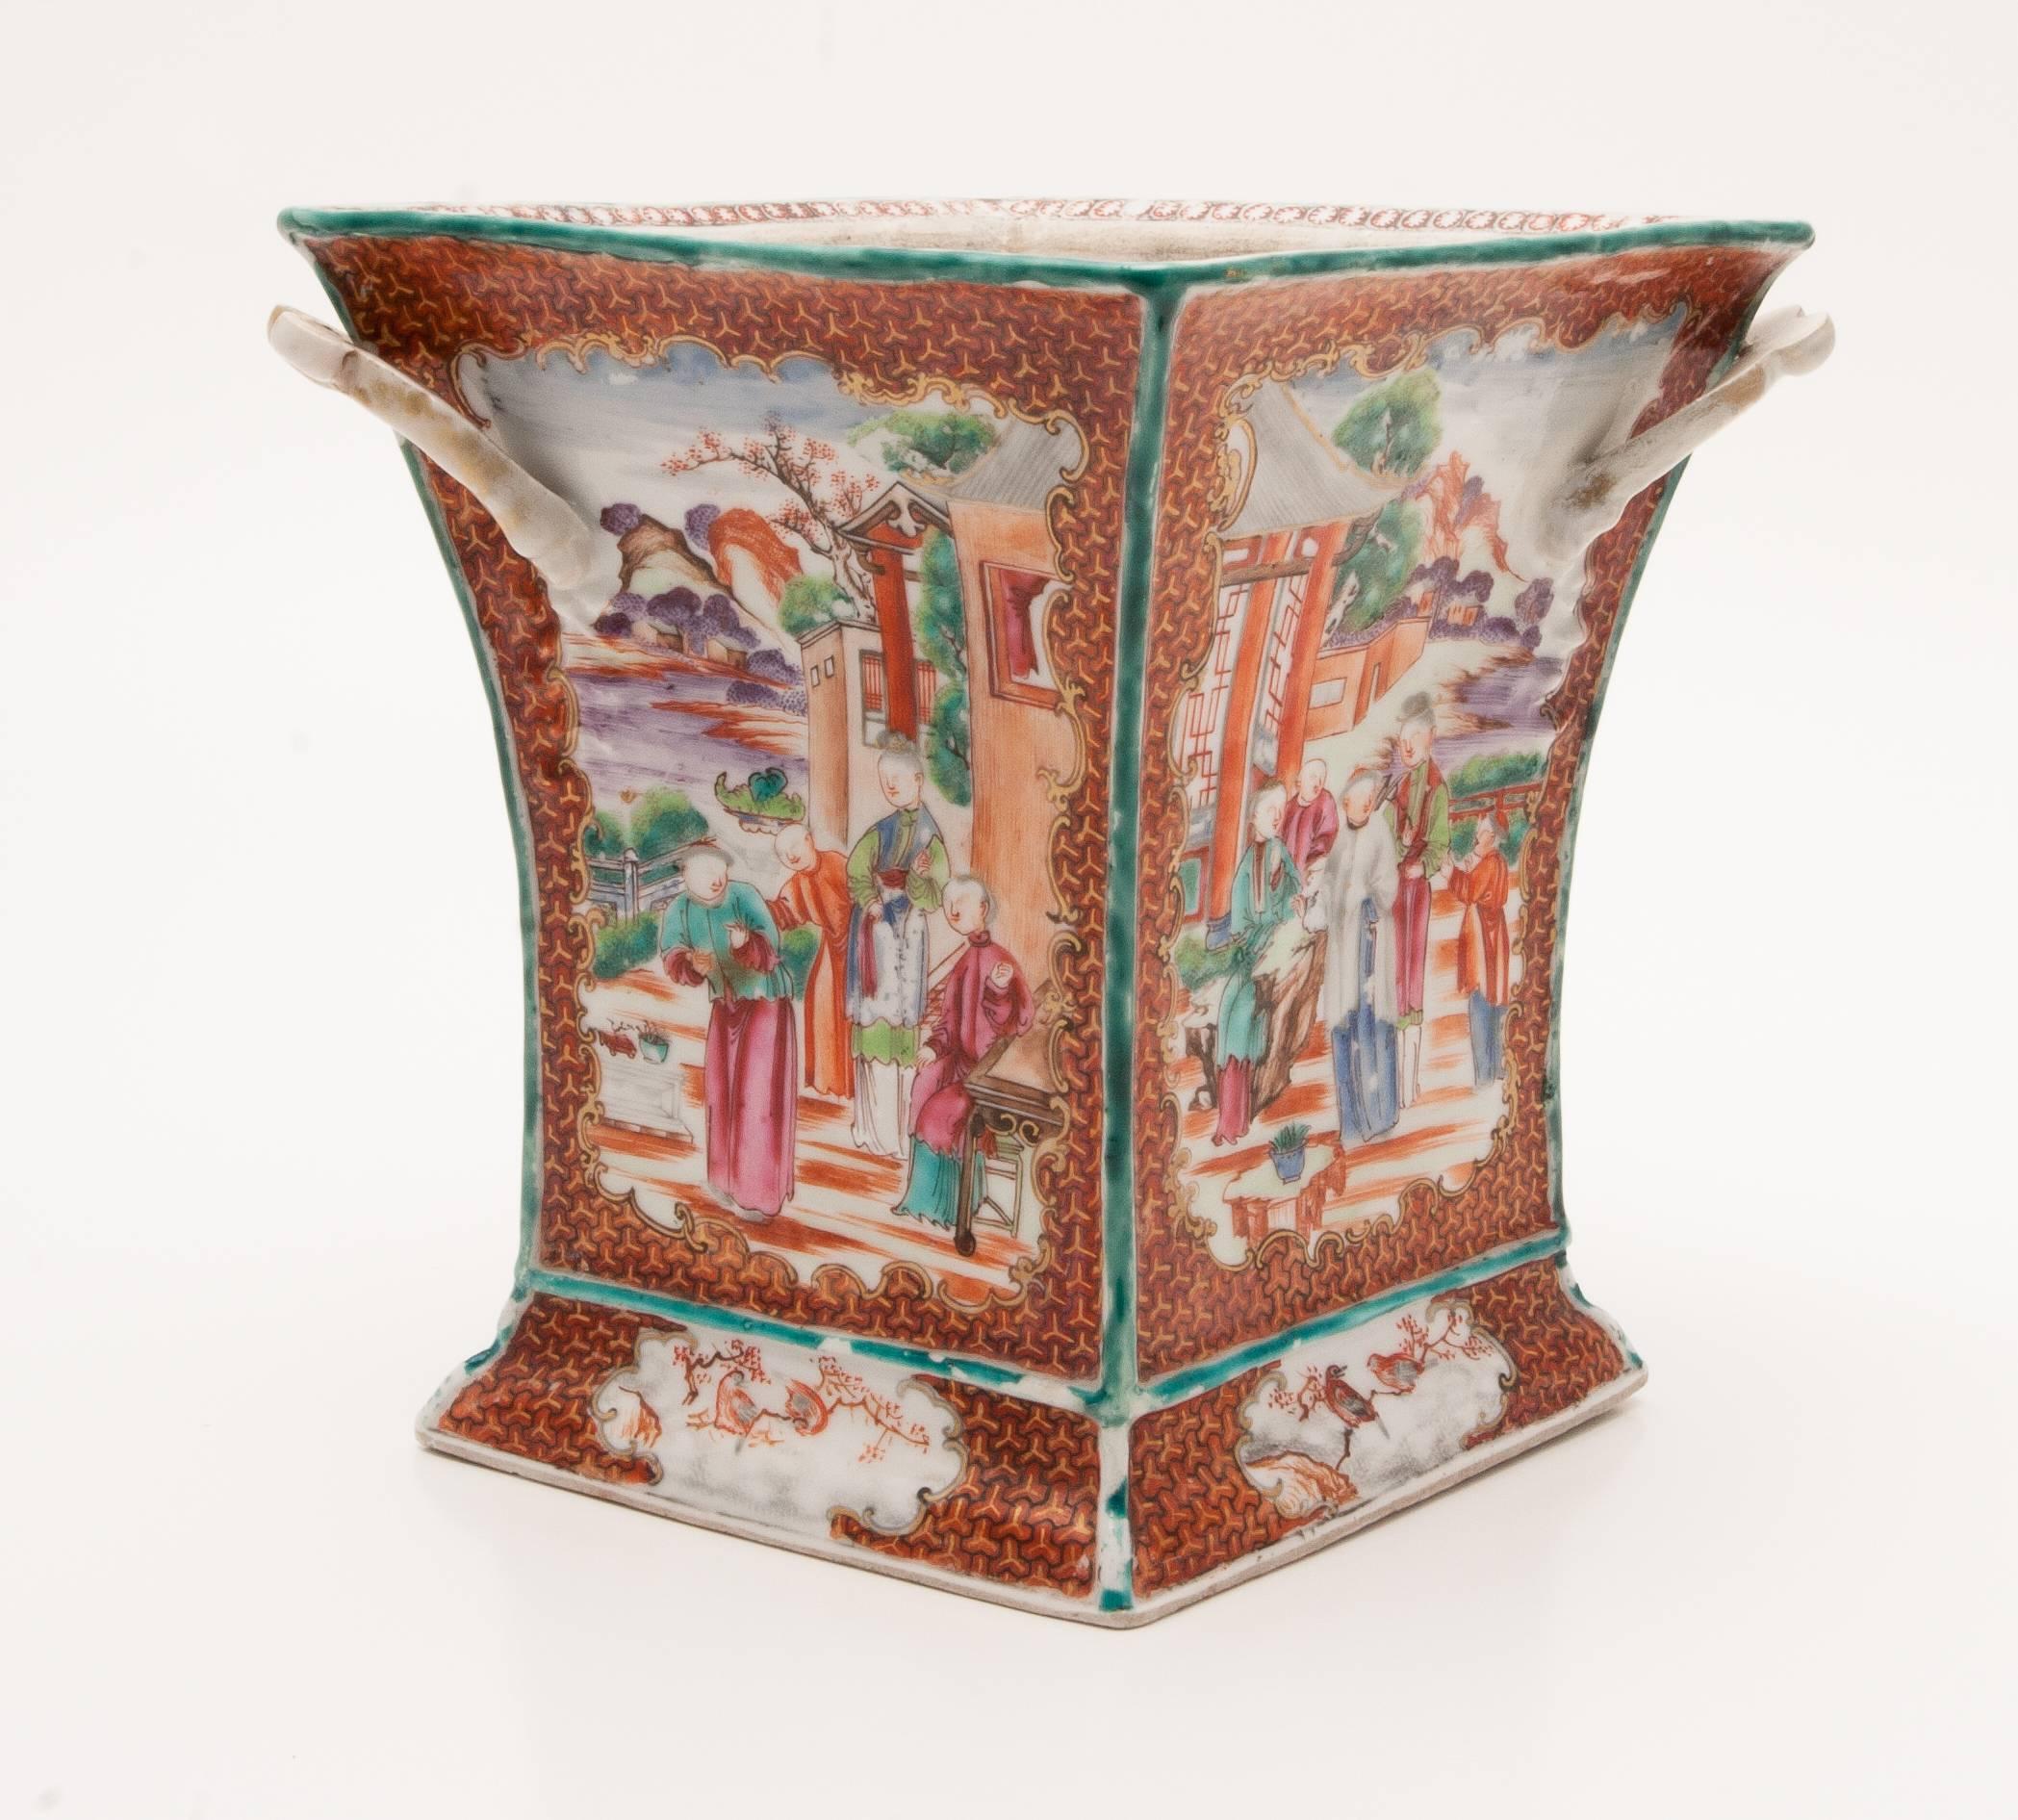 Beautiful Chinese export porcelain vase in the Mandarin Palate, China, circa 1770. The vase is triangle in shape and has two handles on the sides.  